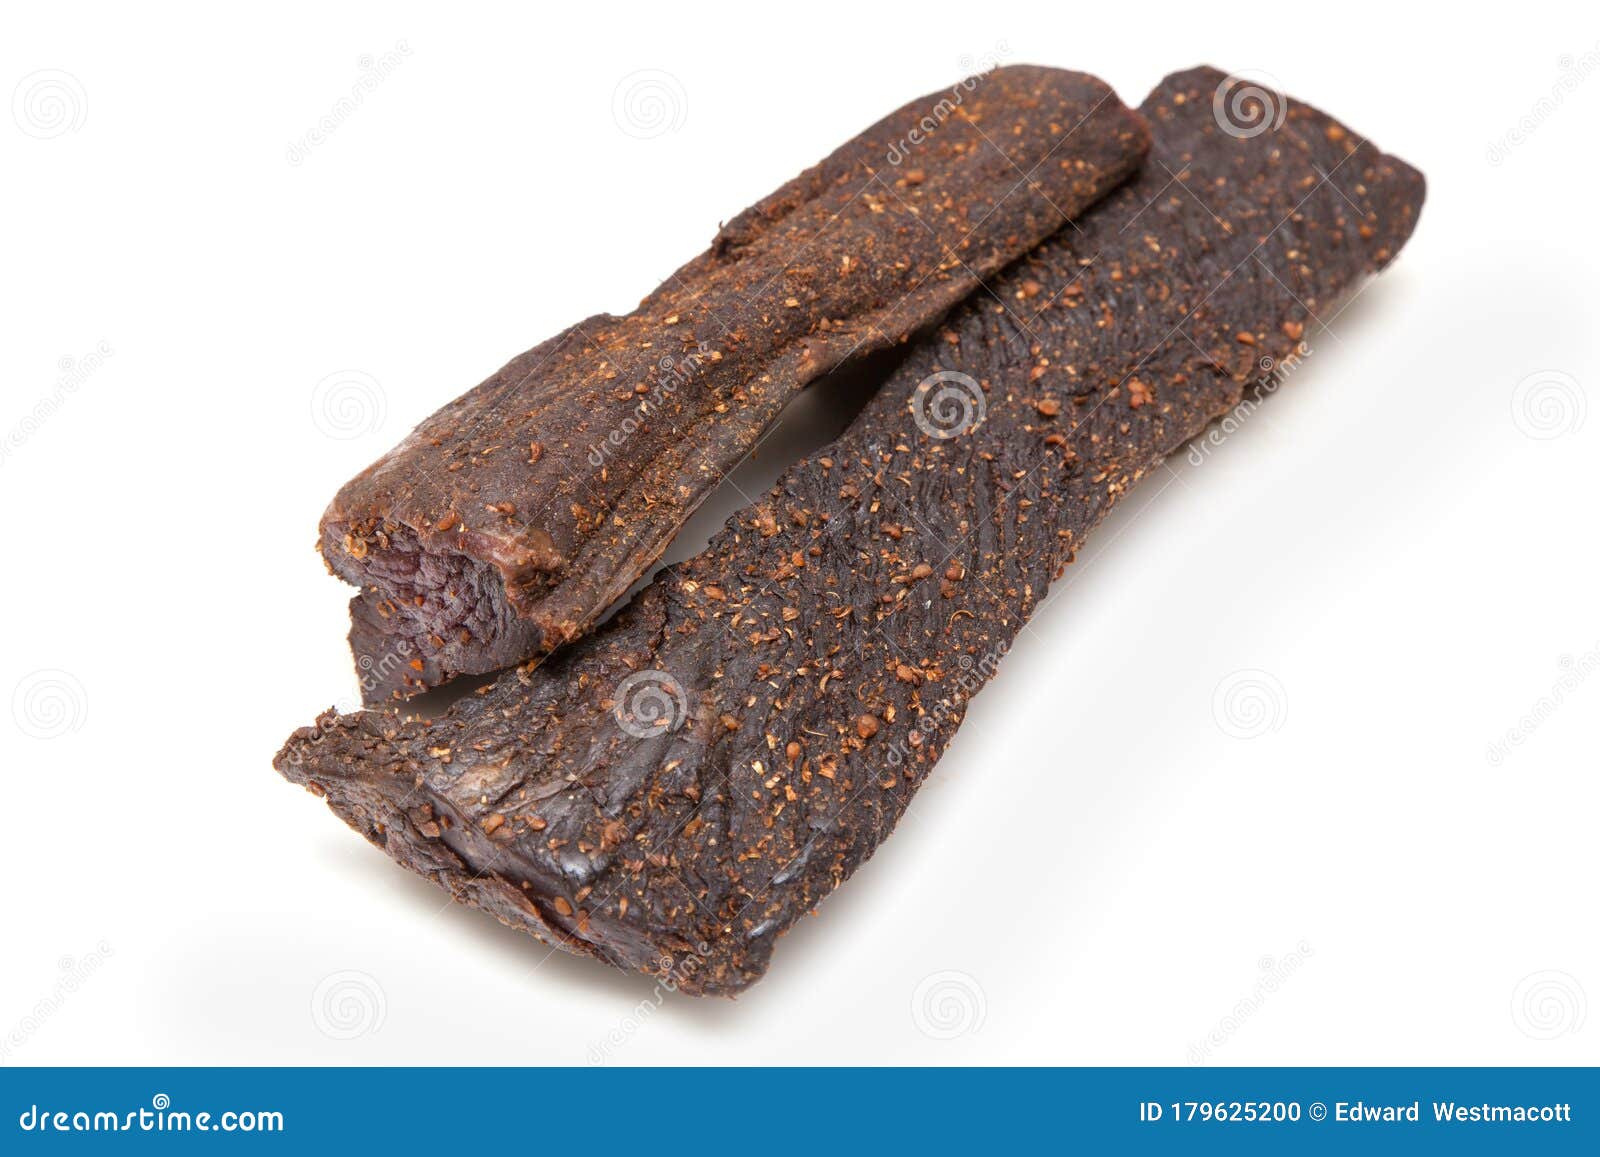 Beef Biltong South African Beef Jerky. Stock Photo - Image of isolated ...